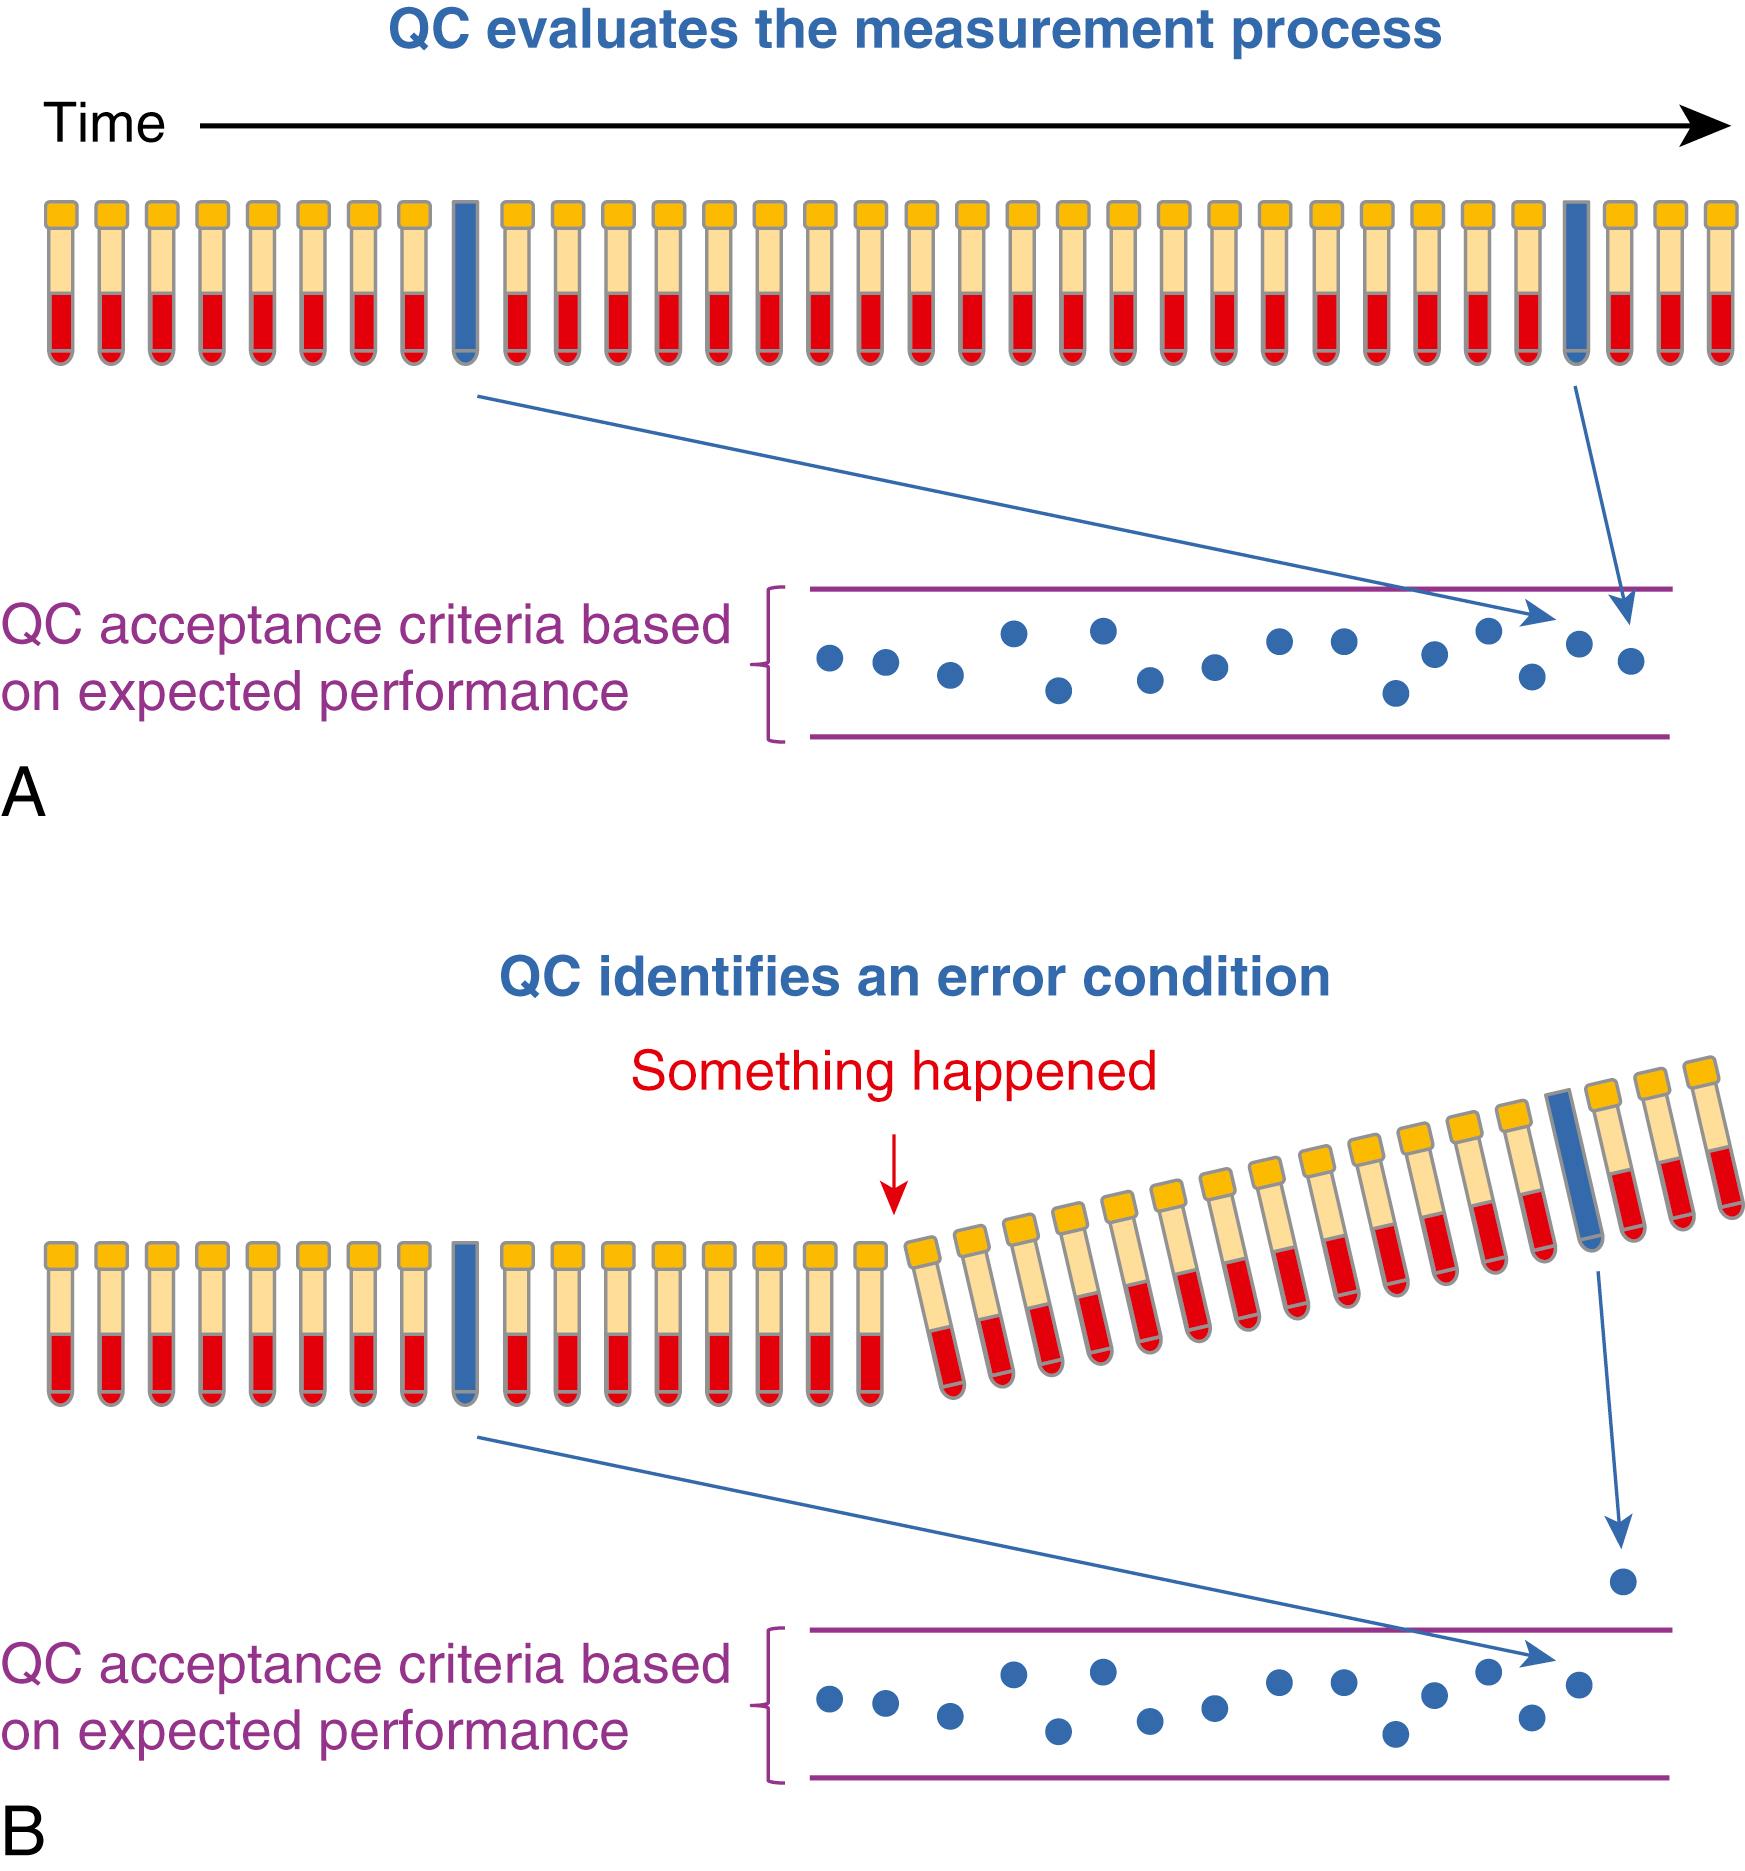 Figure 11.6, Panel A shows that quality control (QC) samples (blue) are periodically measured in place of patient samples (yellow/red) to determine whether the results for QC samples are within expected performance limits for a measurement procedure. Panel B shows that a QC result can identify that a measurement error condition occurred at some time since the last acceptable QC result was measured.